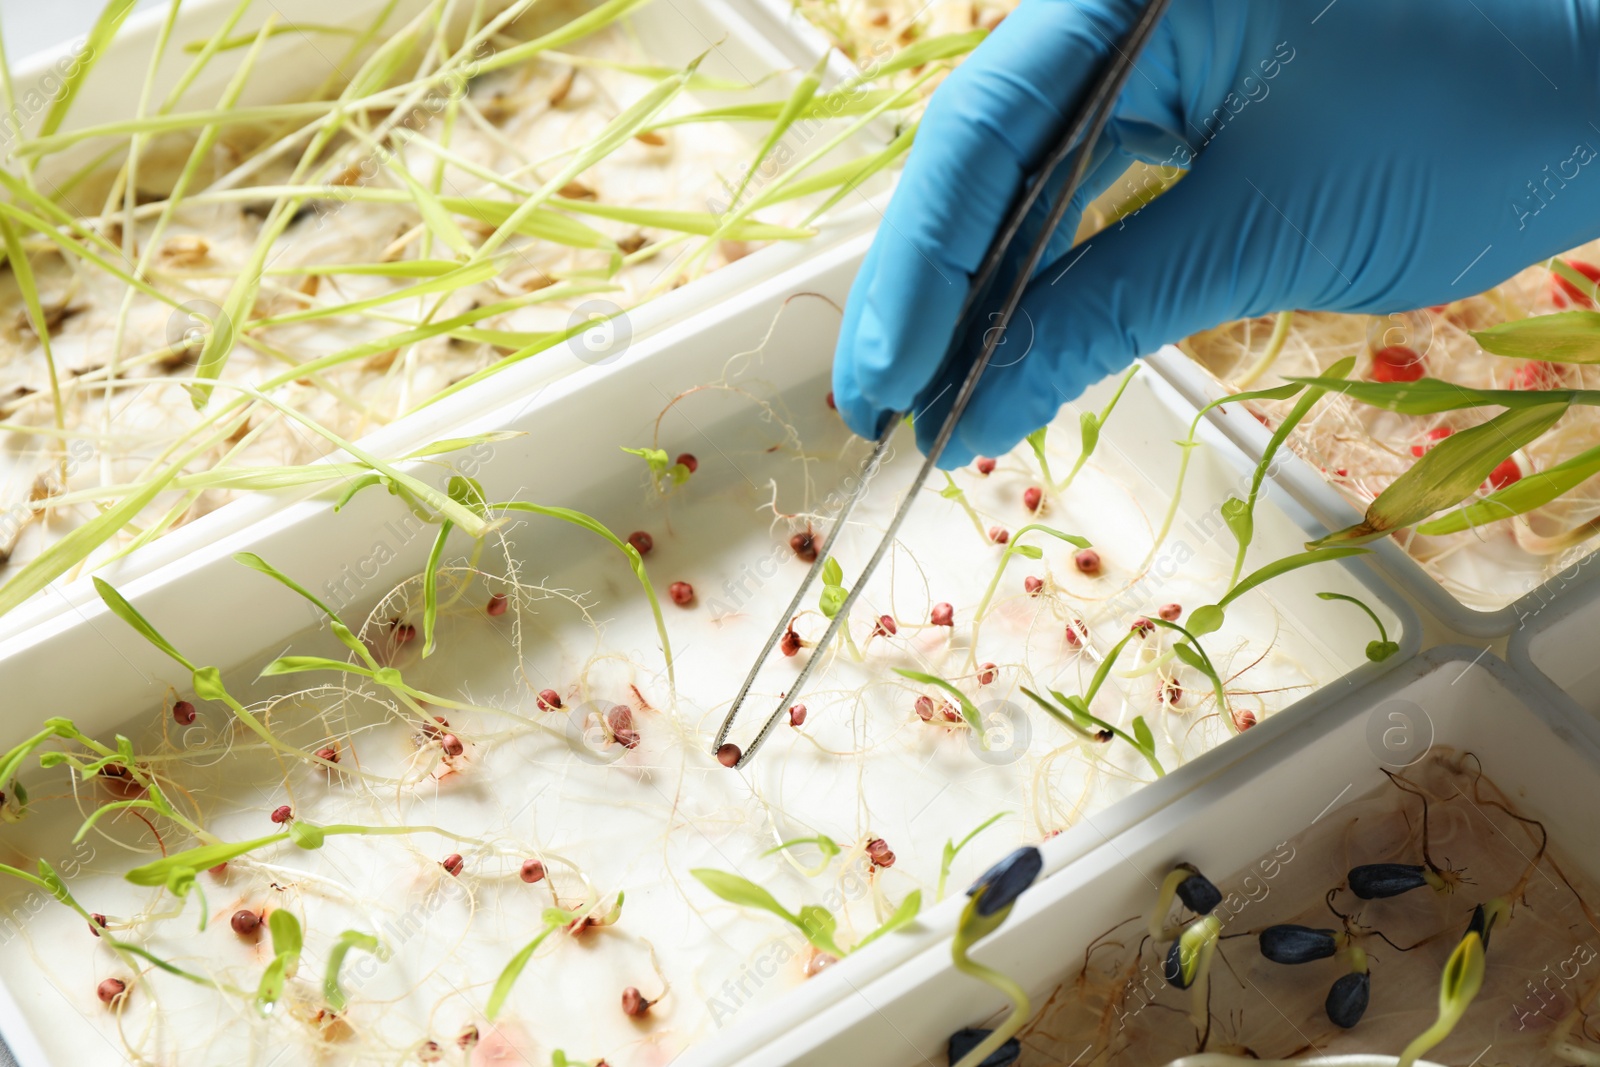 Photo of Scientist taking sprouted corn seed from container with tweezers, closeup. Laboratory analysis